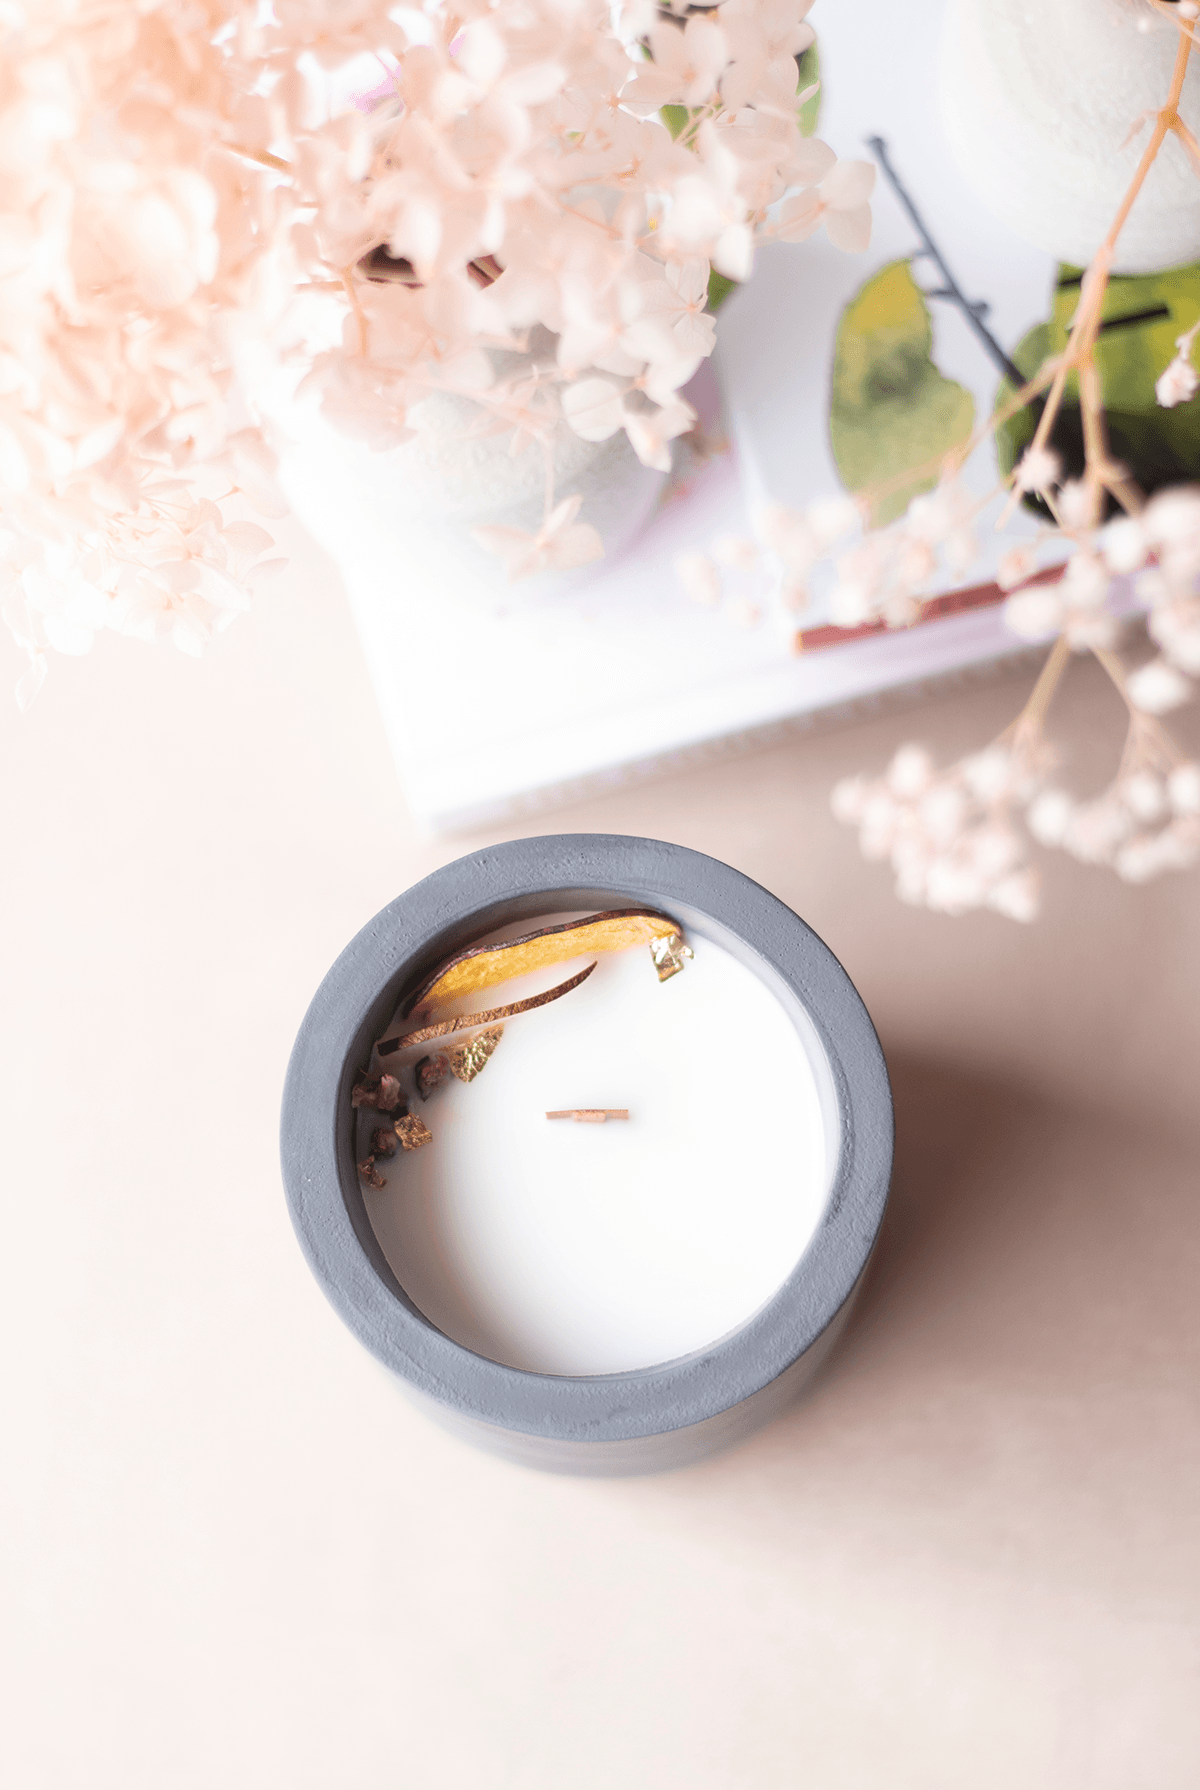 peach candle, wood wick, gift ideas, concrete candles, house warming gift, luxury candles, pretty candles, grey candle, home decor, vegan candles, coconut wax candle, wood wick candle, candles